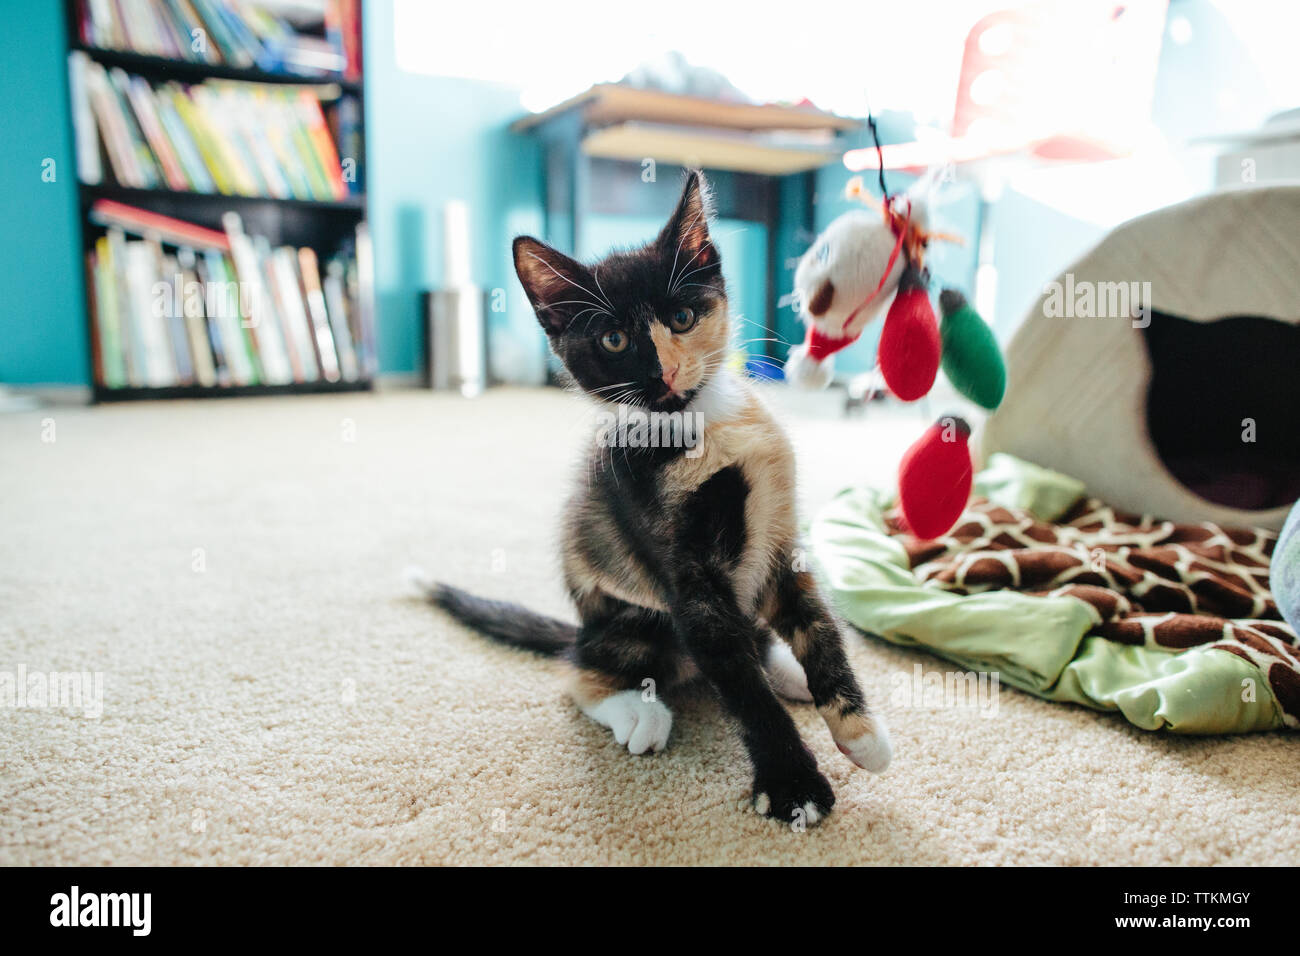 Kitten looks at camera while cat toy is near its face Stock Photo